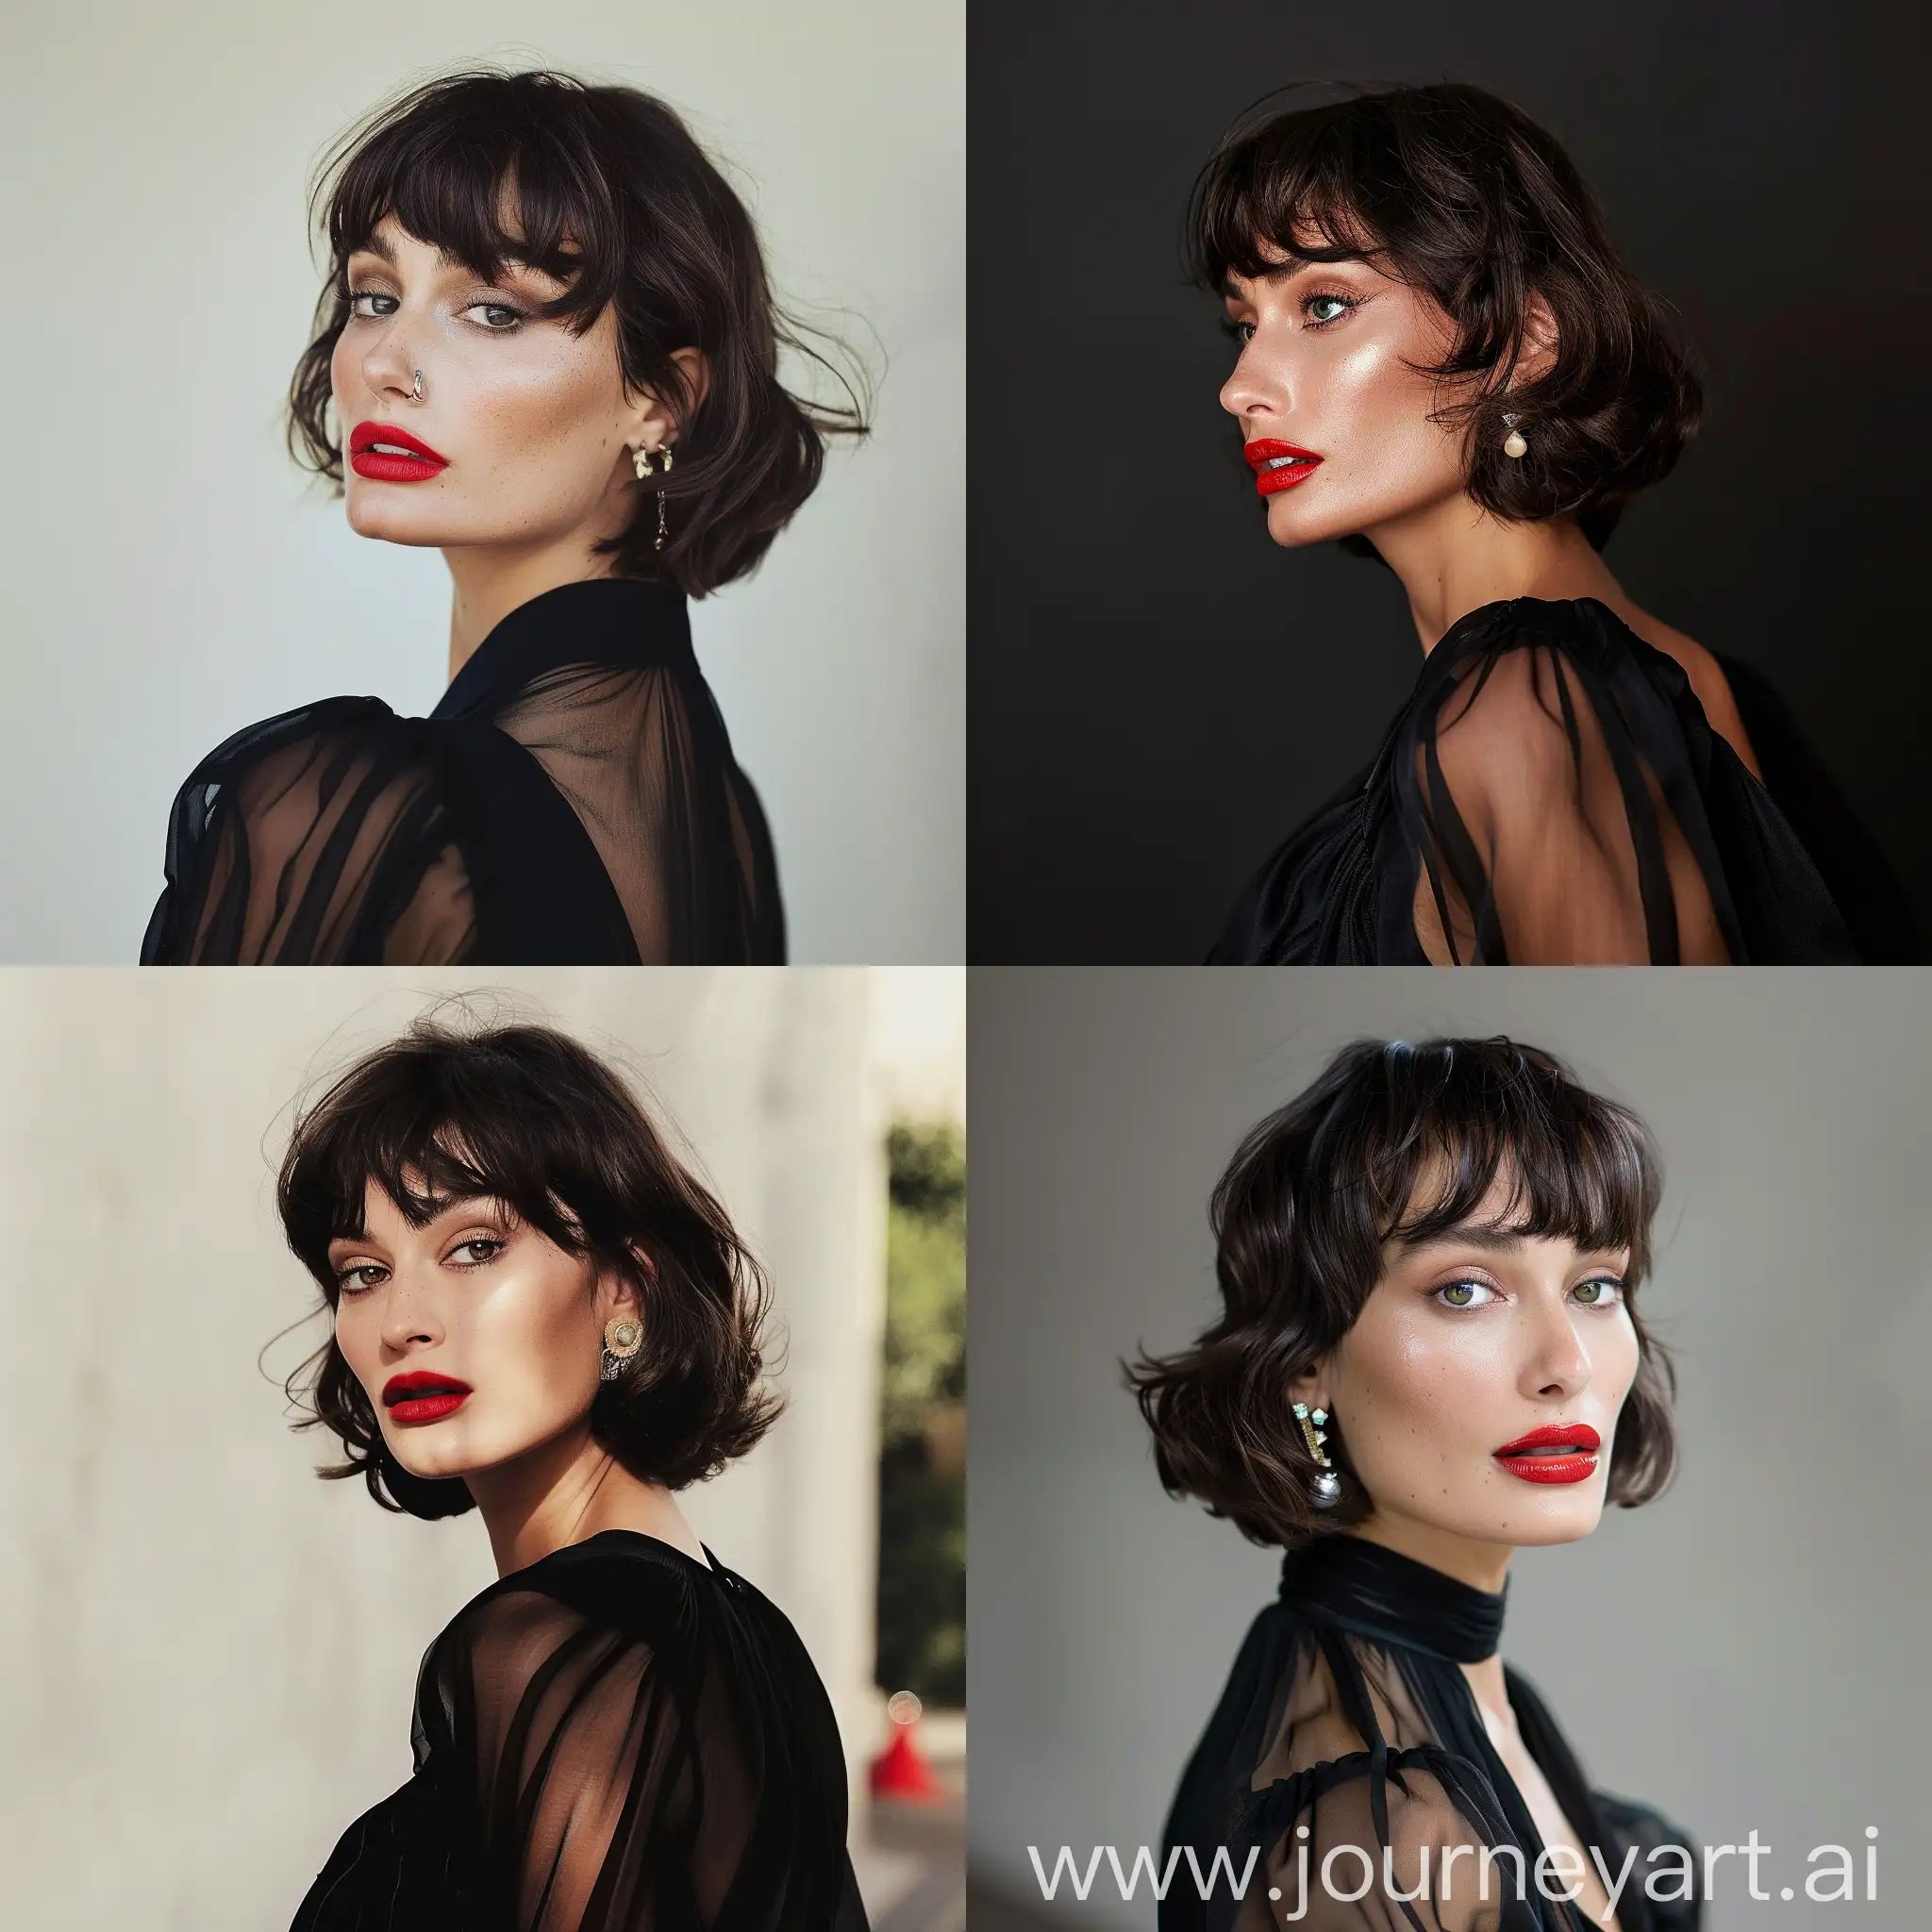 Professional photograph of a gorgeous super model with short hair, bangs, profile shot